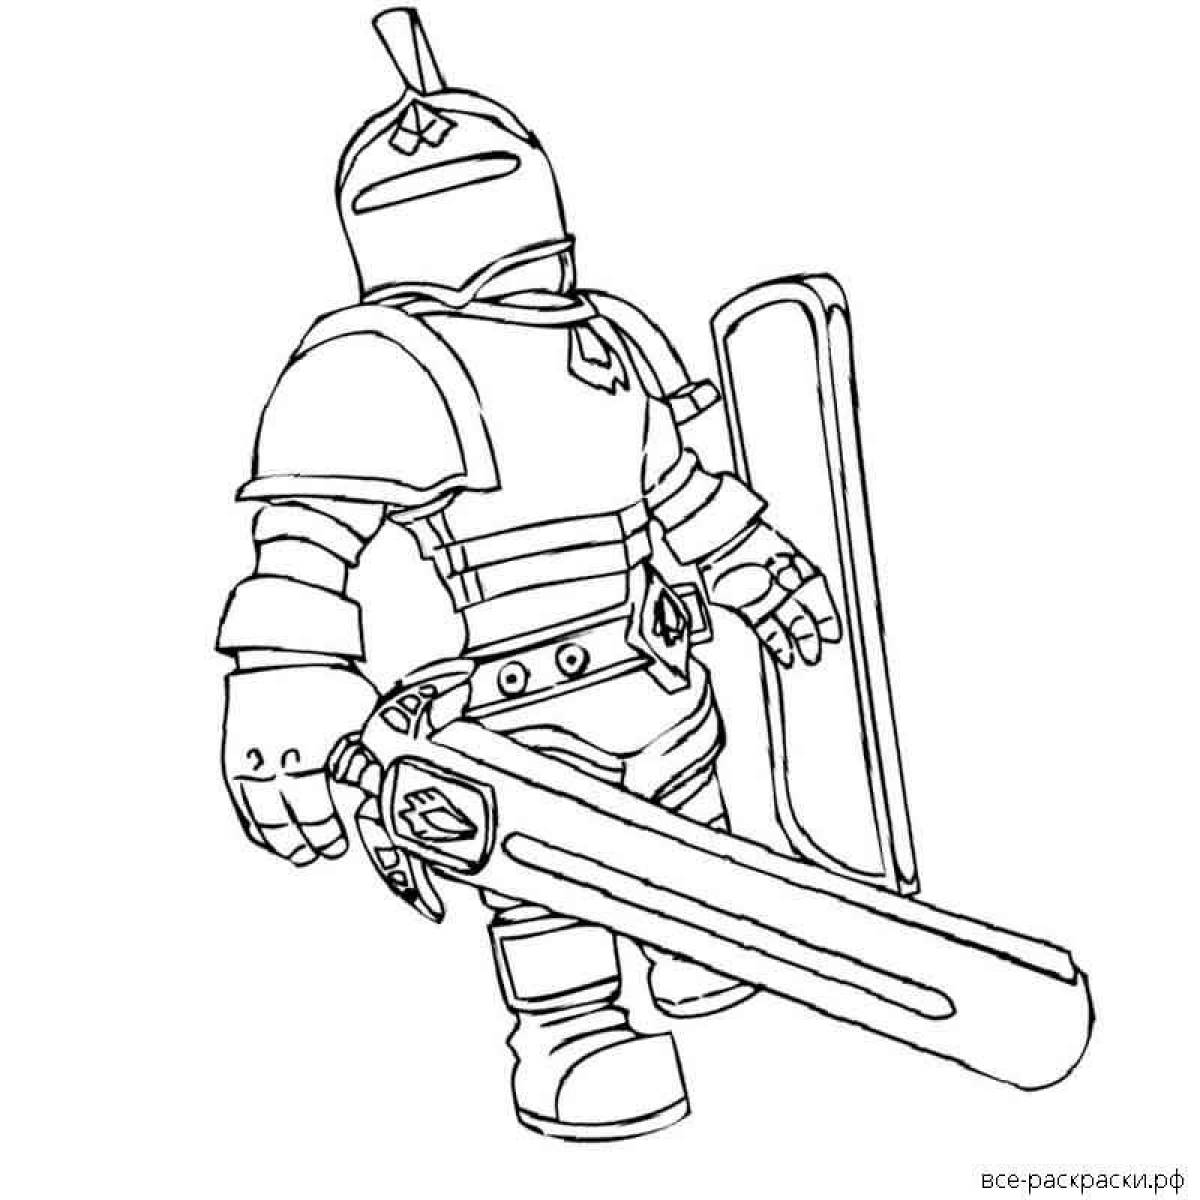 Amazing roblox skins coloring book